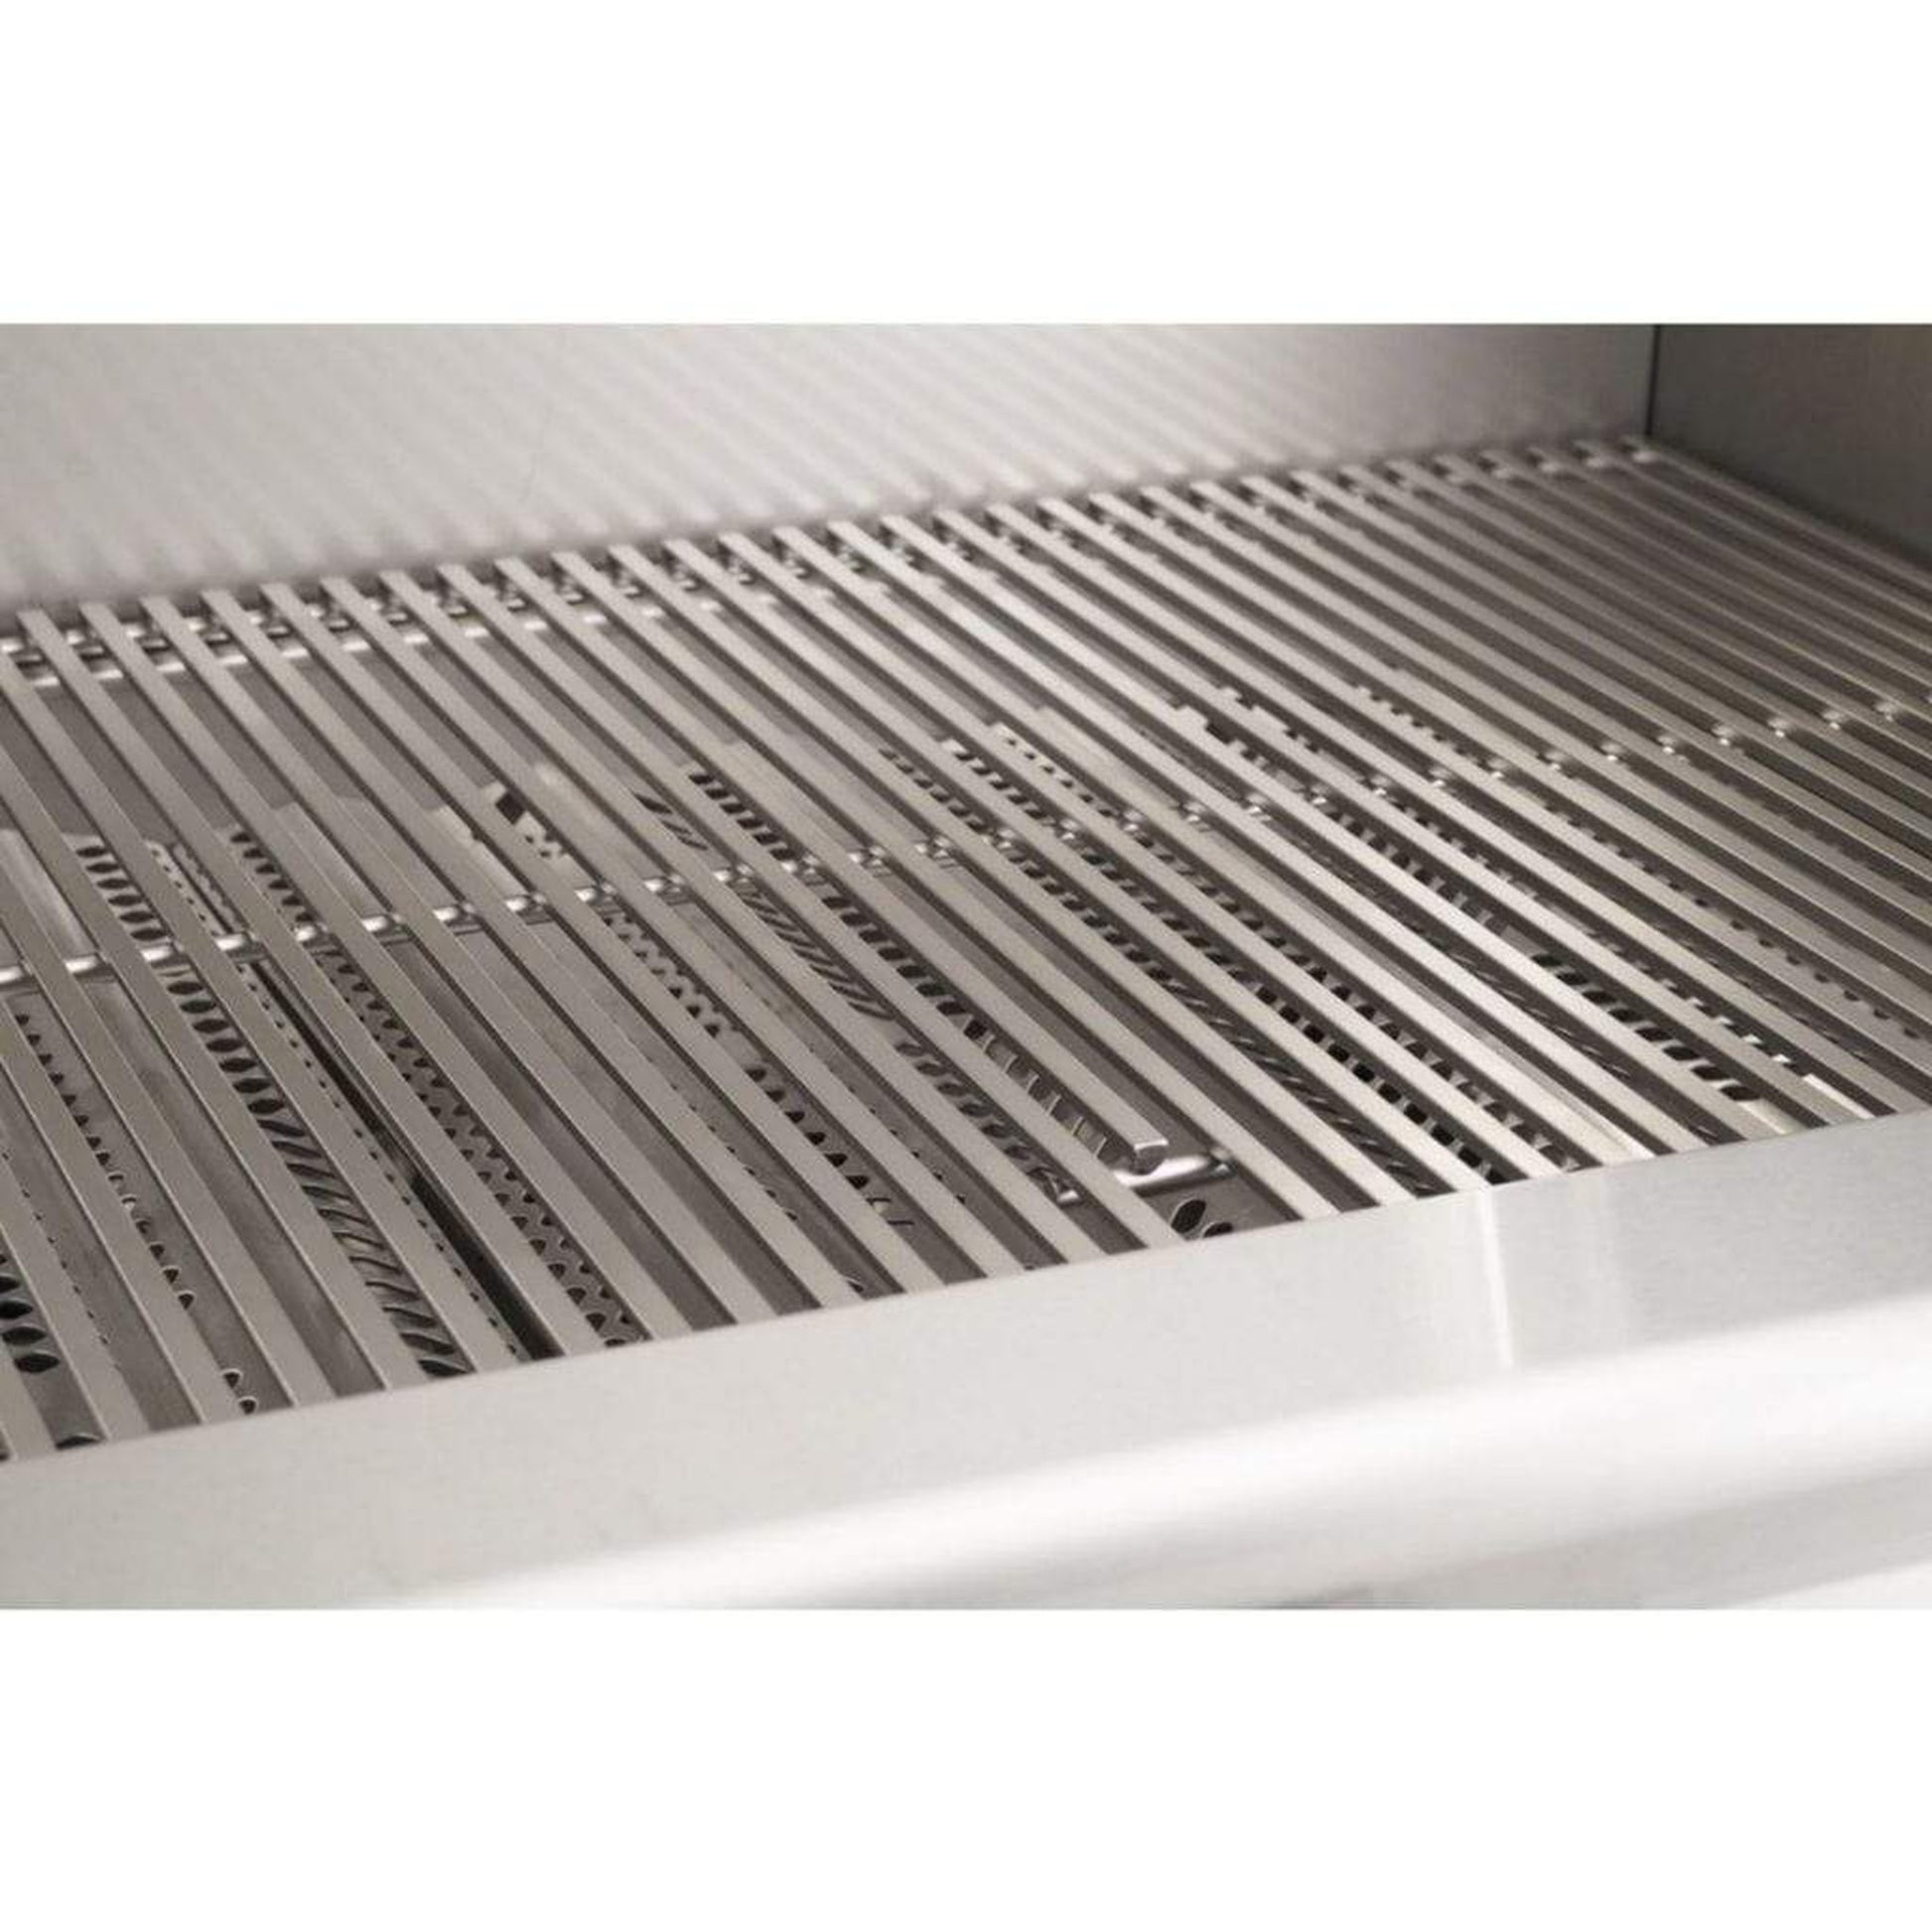 American Outdoor Grill 24" L-Series 2-Burner Patio Post Gas Grill